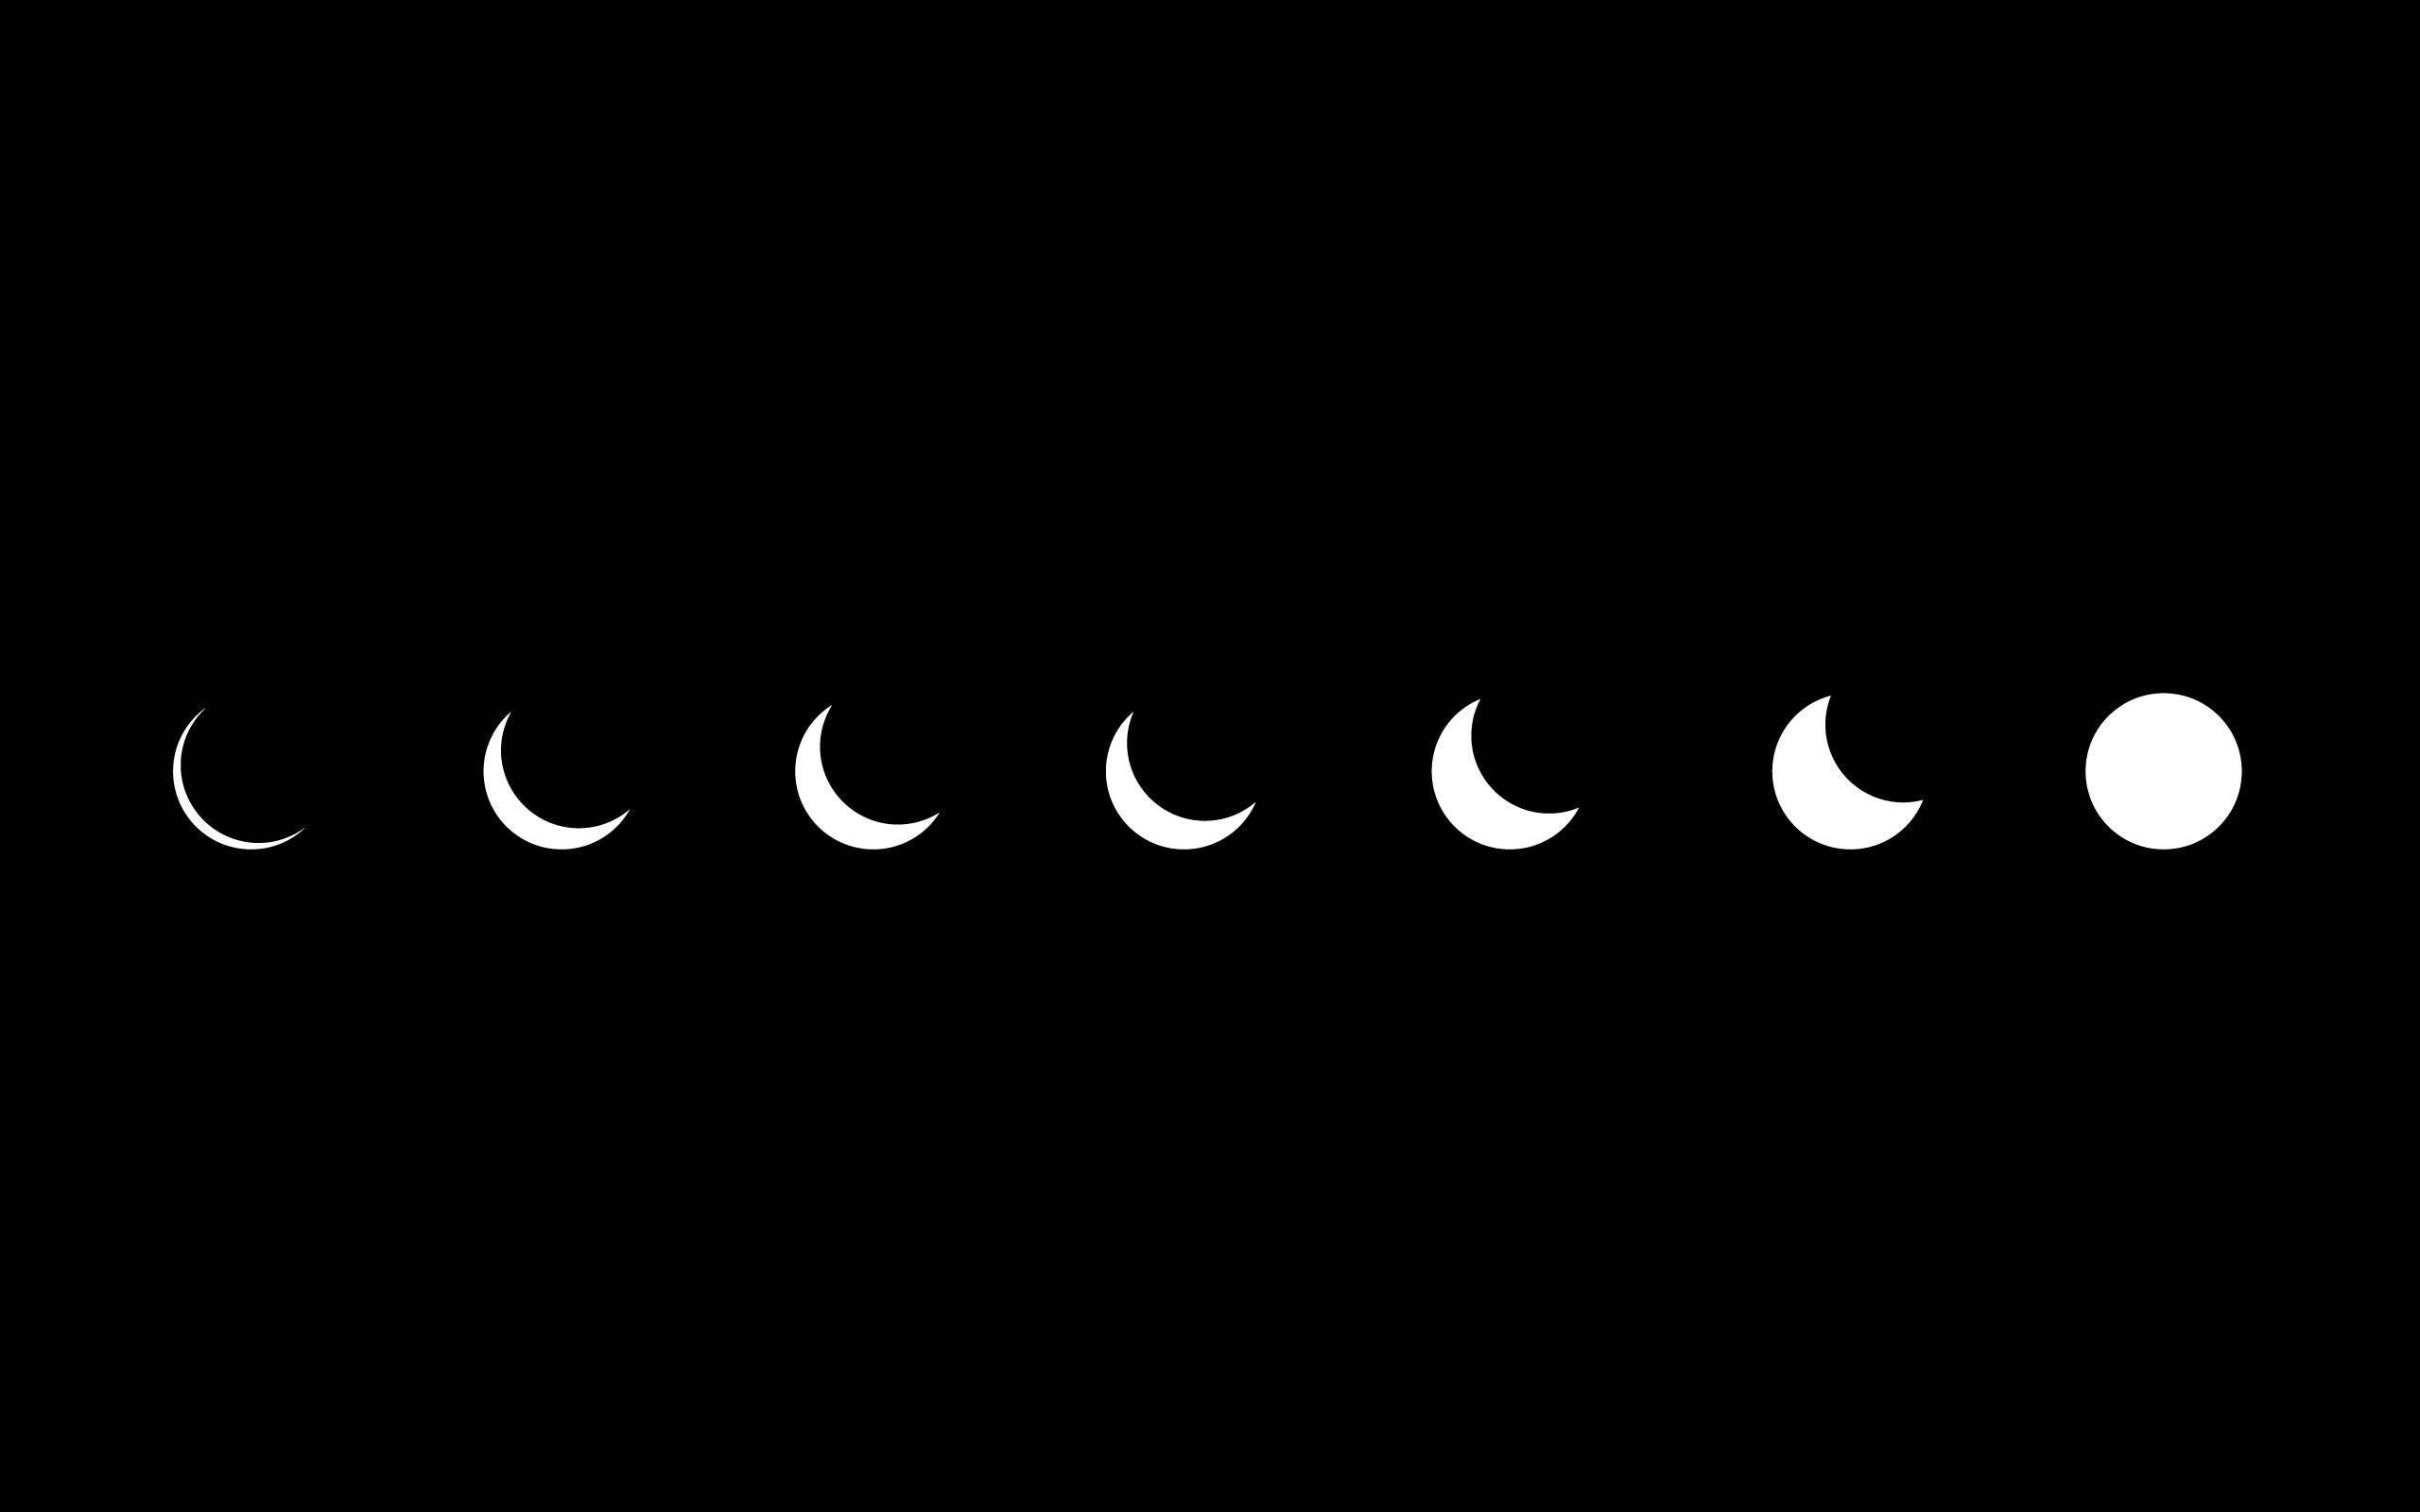 The phases of a moon in black and white - Laptop, black and white, moon phases, gothic